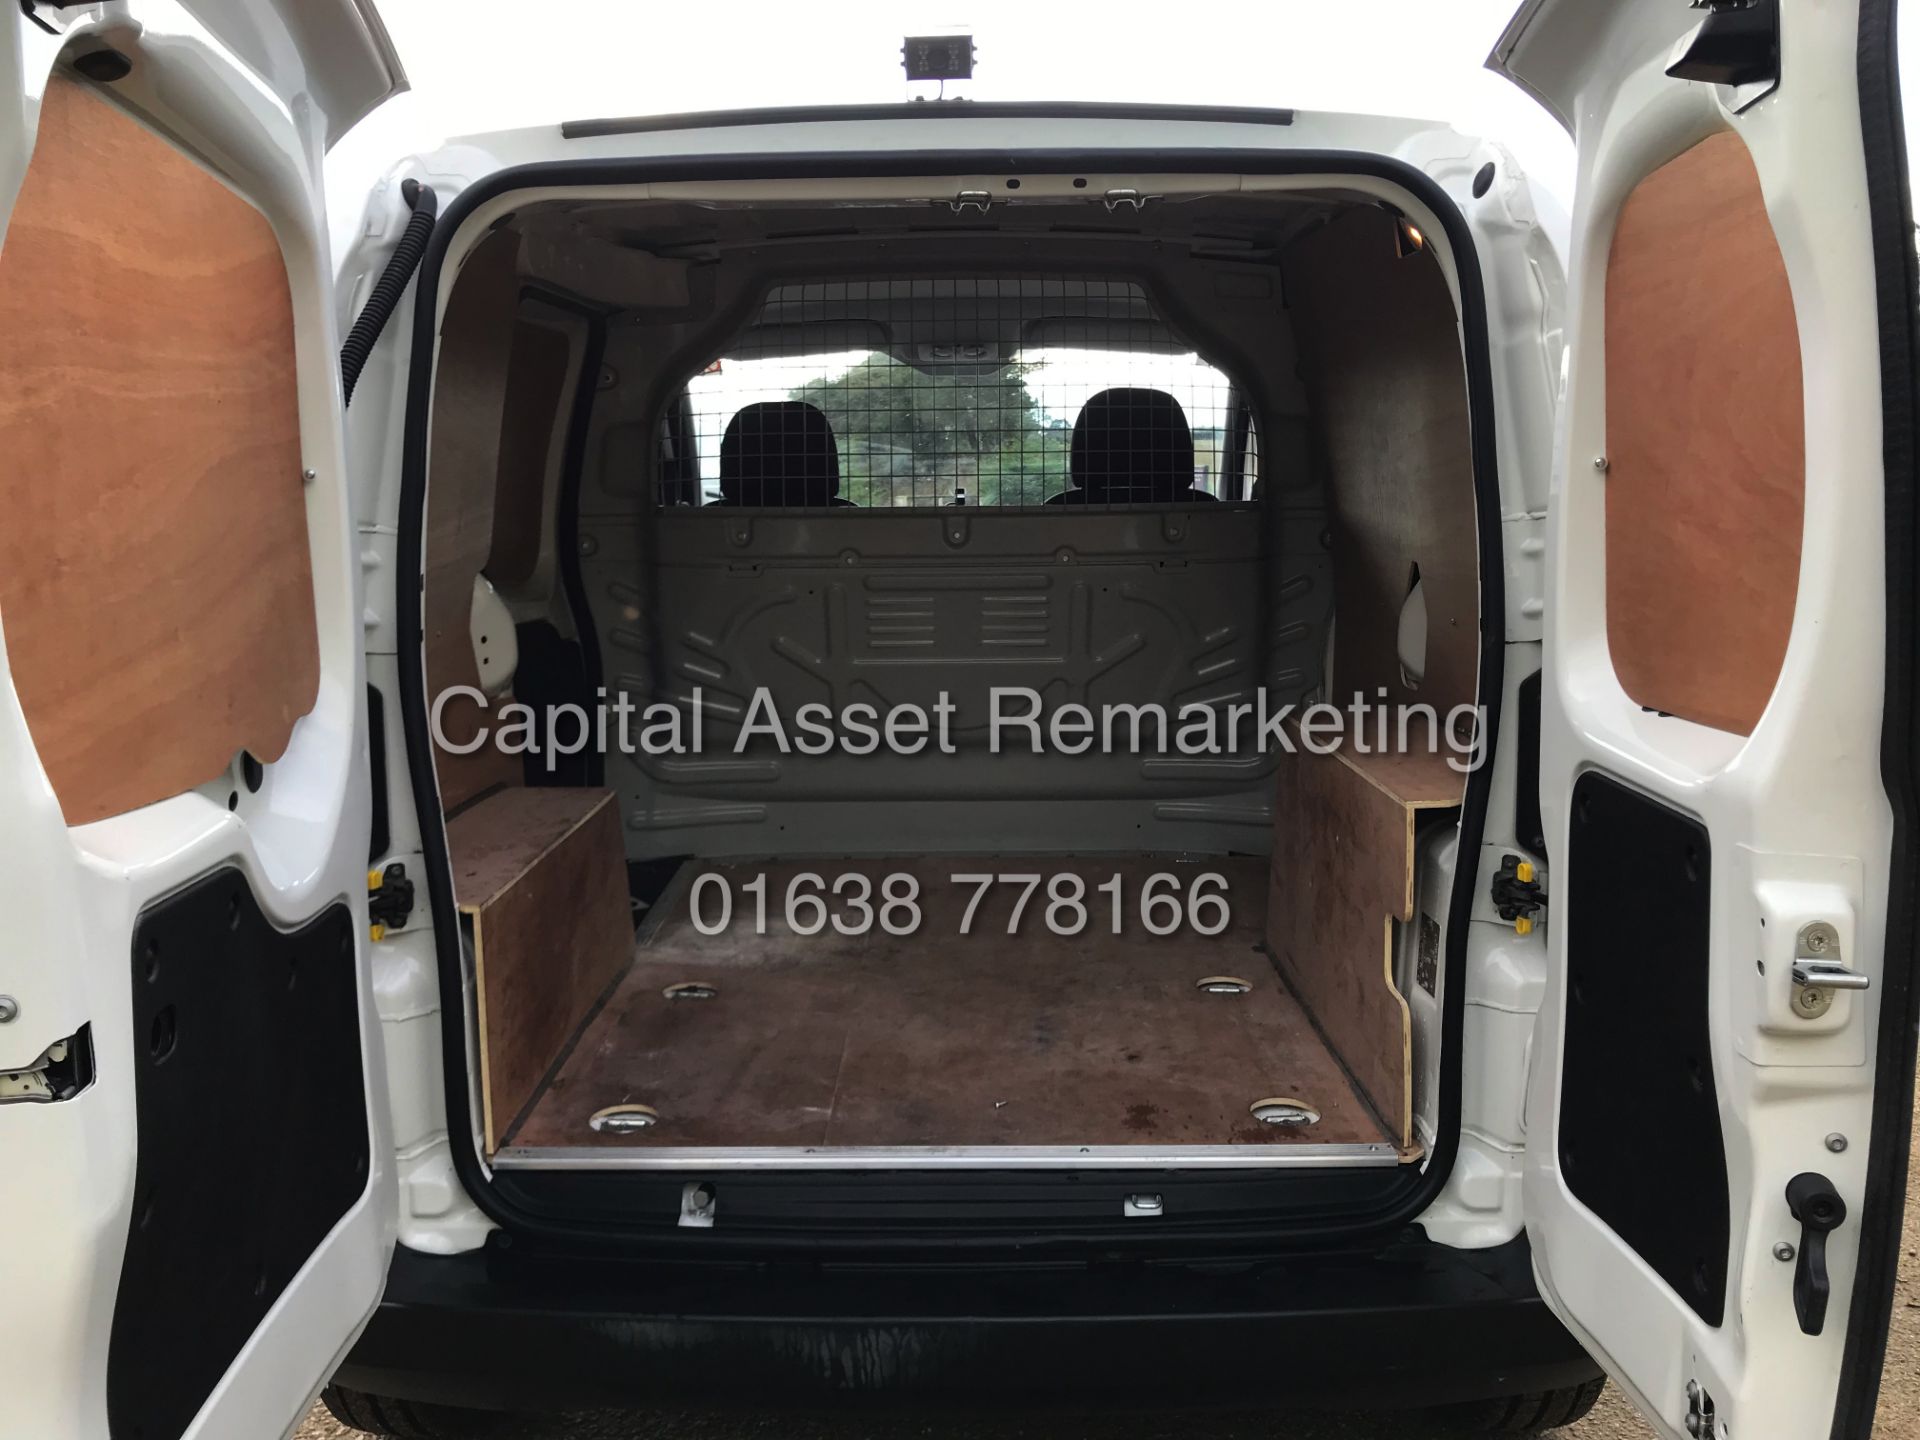 (ON SALE) PEUGEOT BIPPER *PROFESSIONAL EDITION* PANEL VAN (2016) 1 COMPANY OWNER FSH - Image 21 of 30